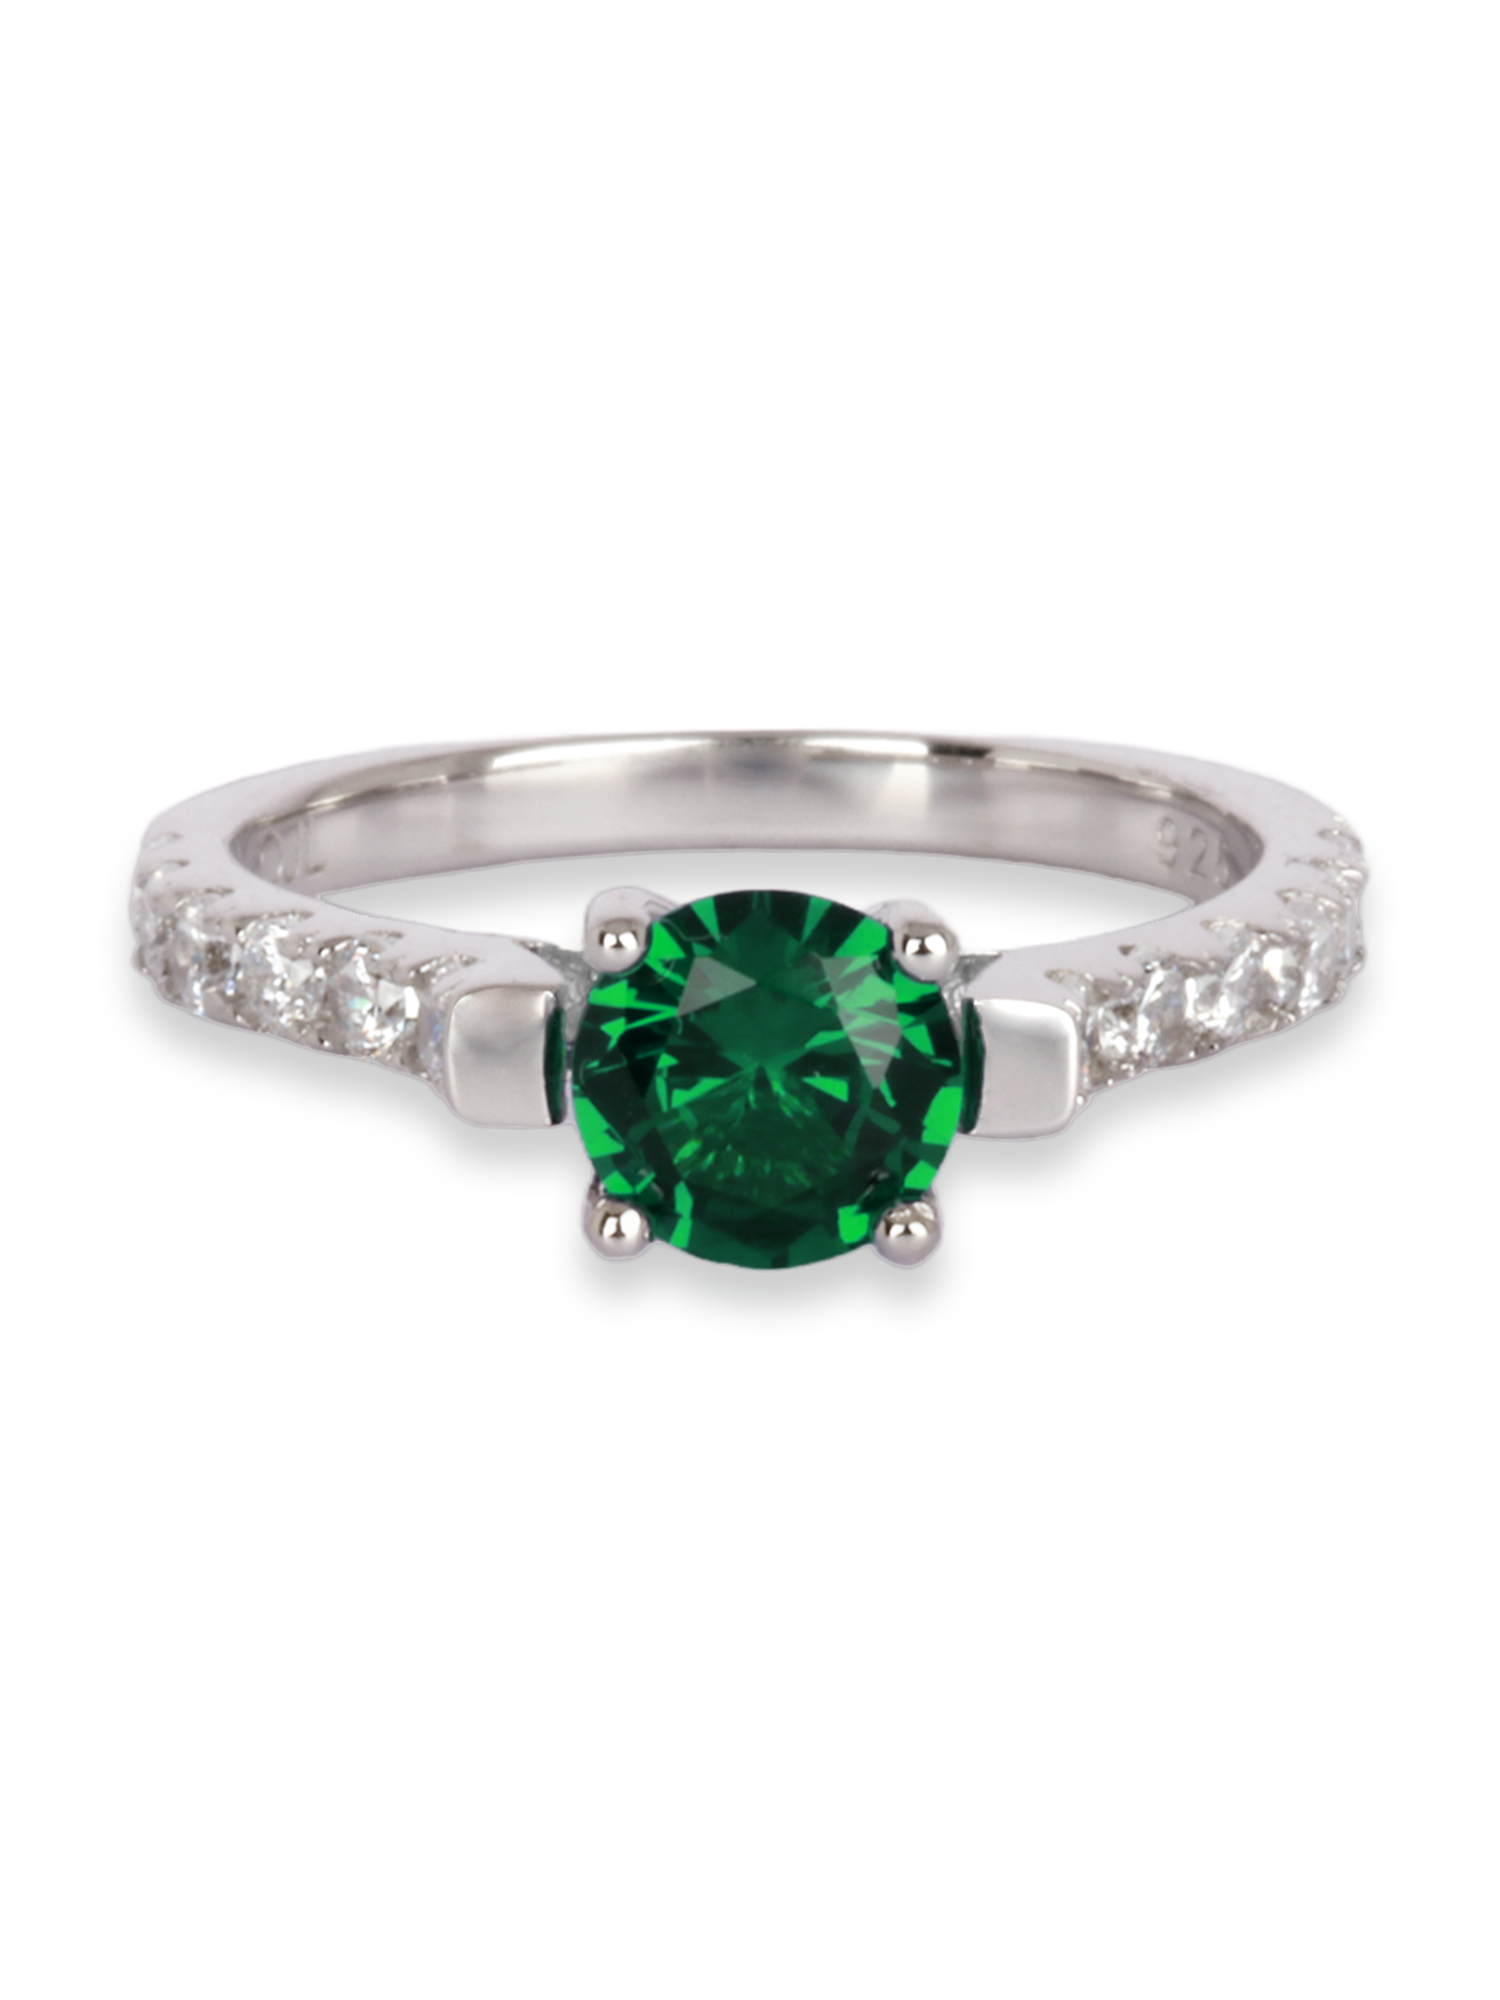 ORNATE JEWELS EMERALD GREEN SOLITAIRE SILVER RING FOR WOMEN-1